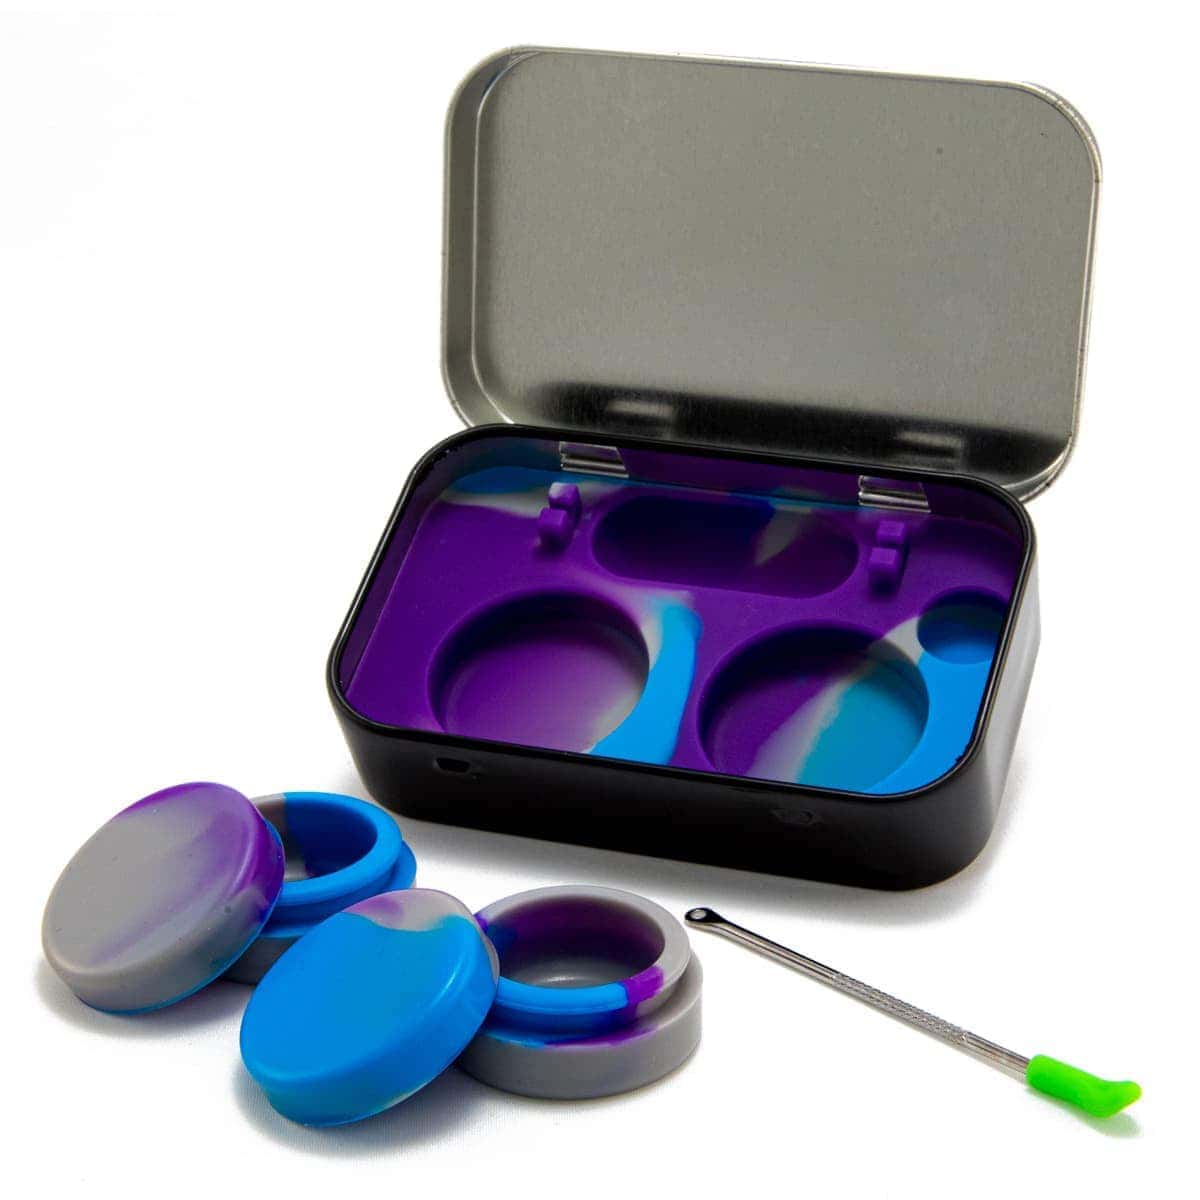 Silicone Dab kit with tool and jars